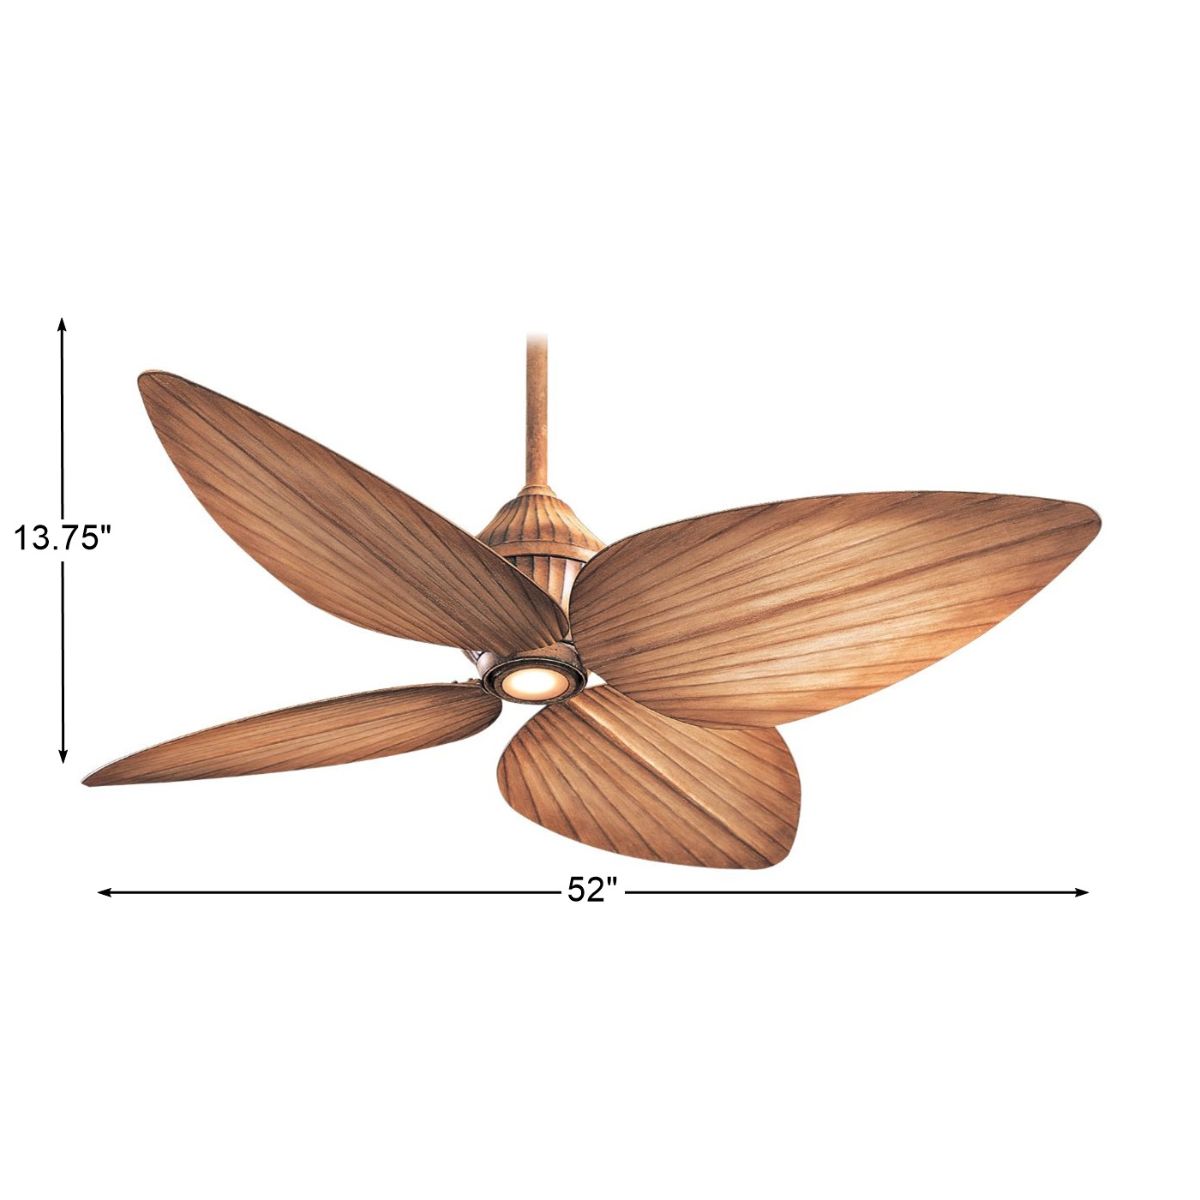 Gauguin 52 Inch Leaf Blades Outdoor Ceiling Fan With Light And Wall Control